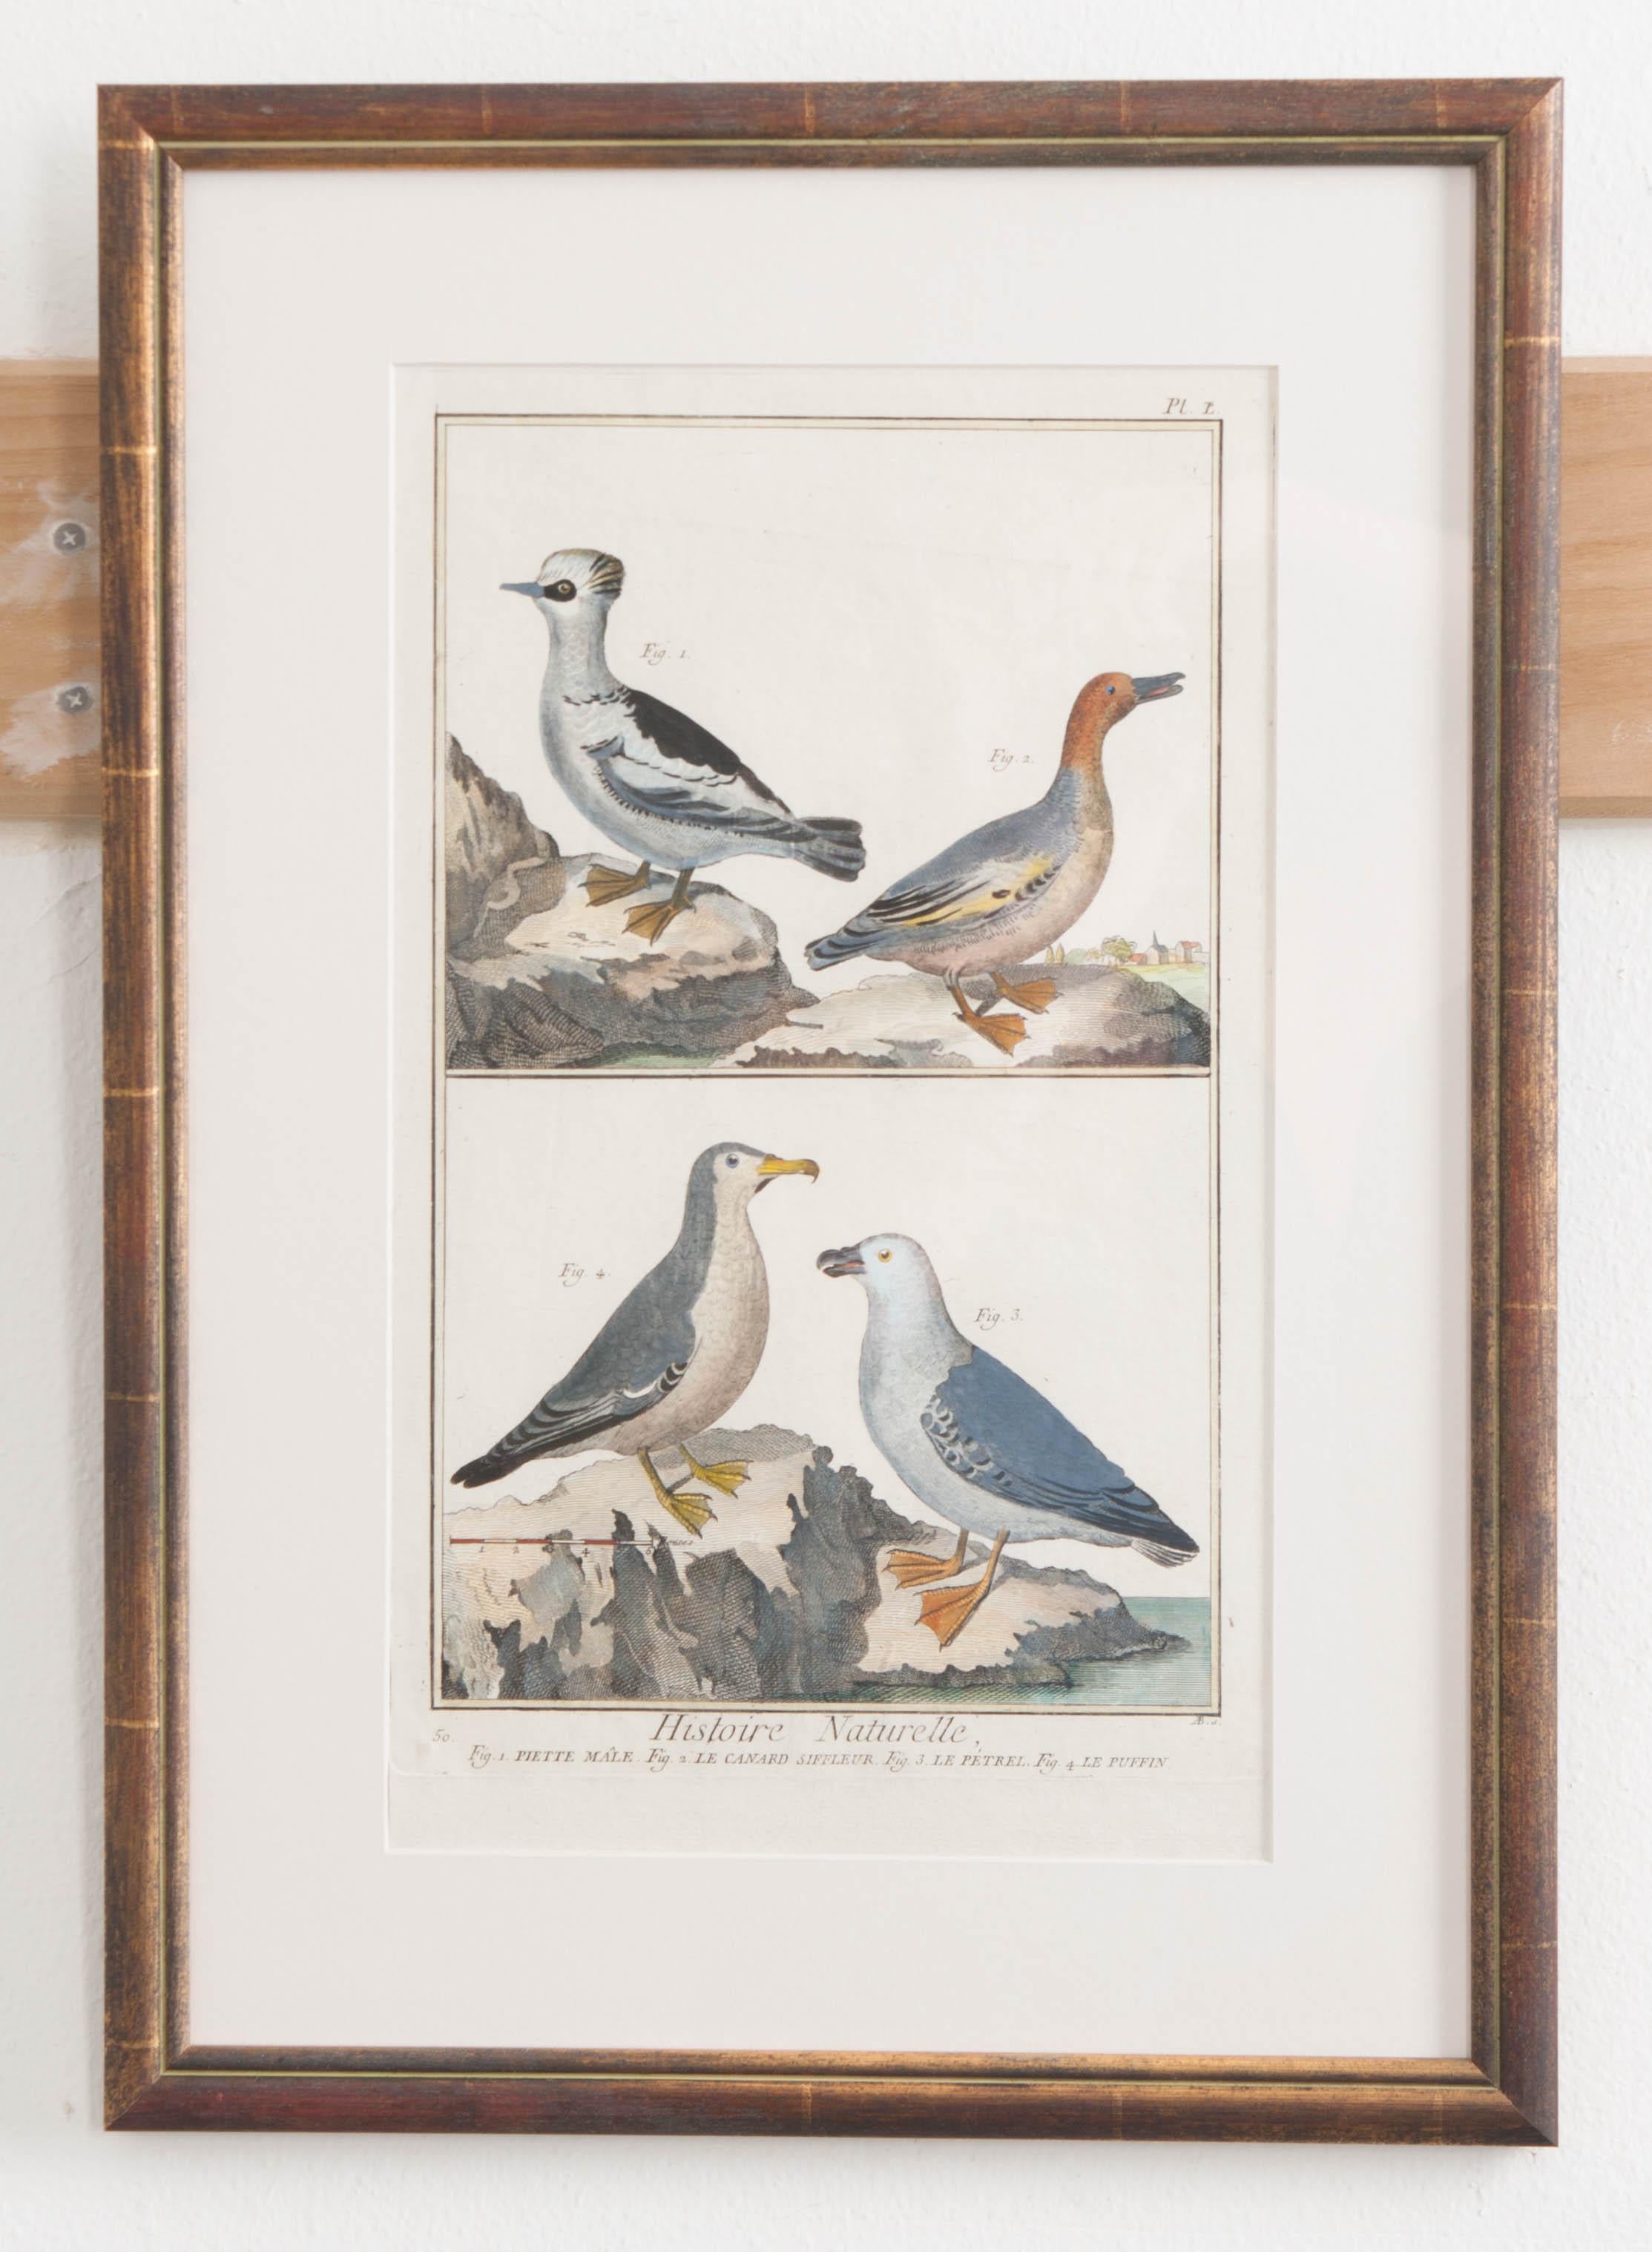 An incredible set of six “Natural History” hand-colored French lithographs from 18th century France. The works depict various species of beautiful birds from around the world. Ducks, loons, cormorants, bird of paradise, Guineafowl, storks and